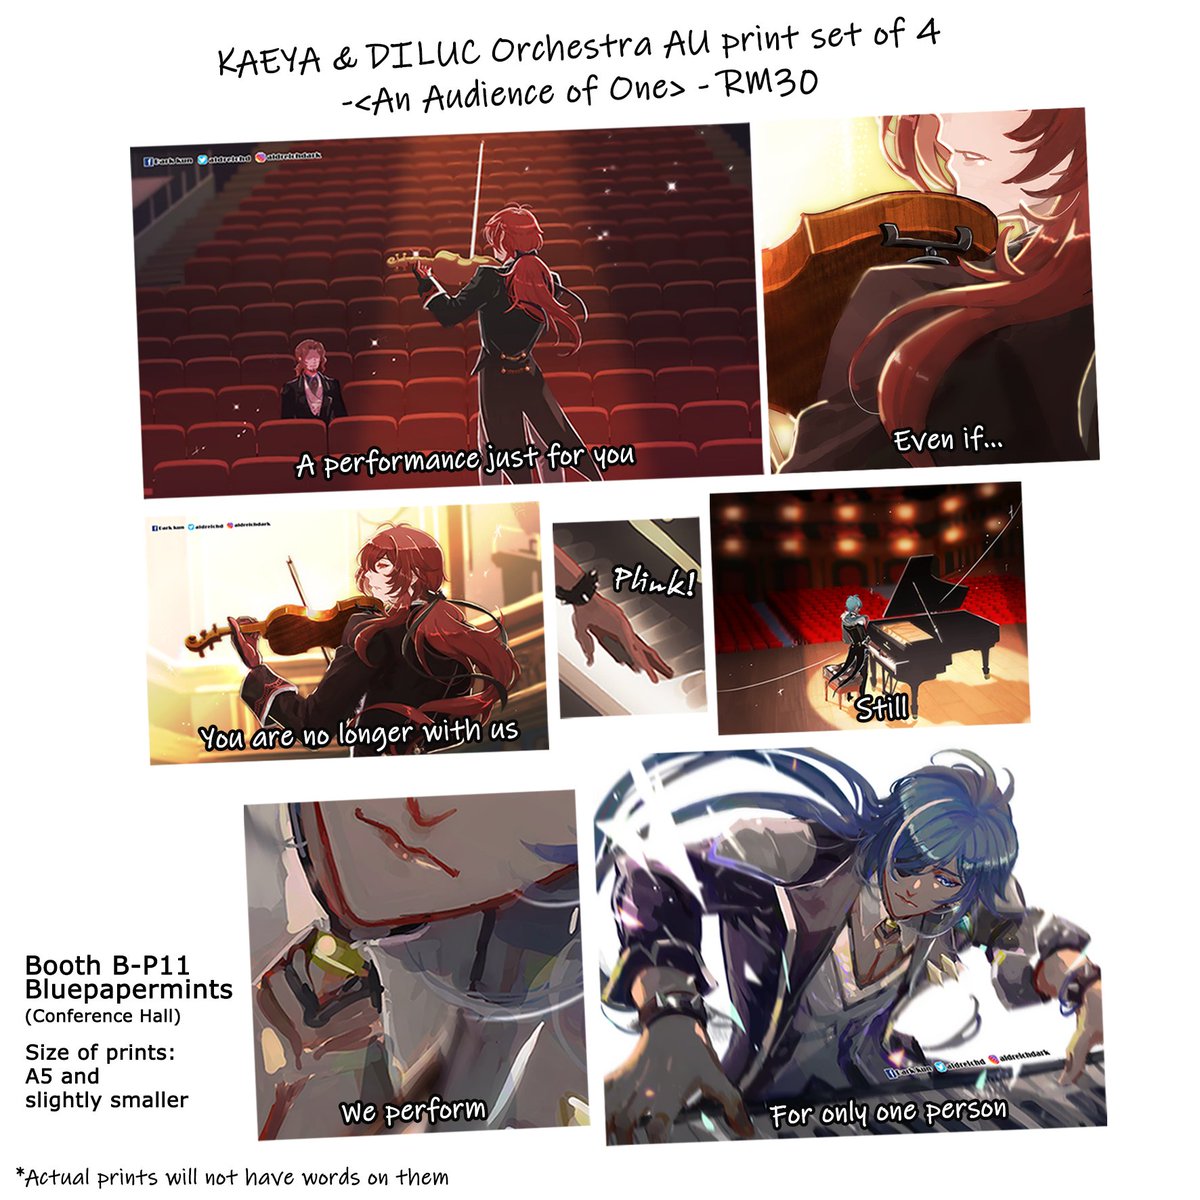 Comic Fiesta catalogue Part 3

Settle all the prints first. Next is the Genshin fancomic that kept getting mistaken as an artbook and the gold foil clear PET washitapes!

Booth B-P11 Bluepapermints (Level 3, Conference Hall)

#comicfiesta2022 #comicfiesta #cf2022 #genshinimpact 